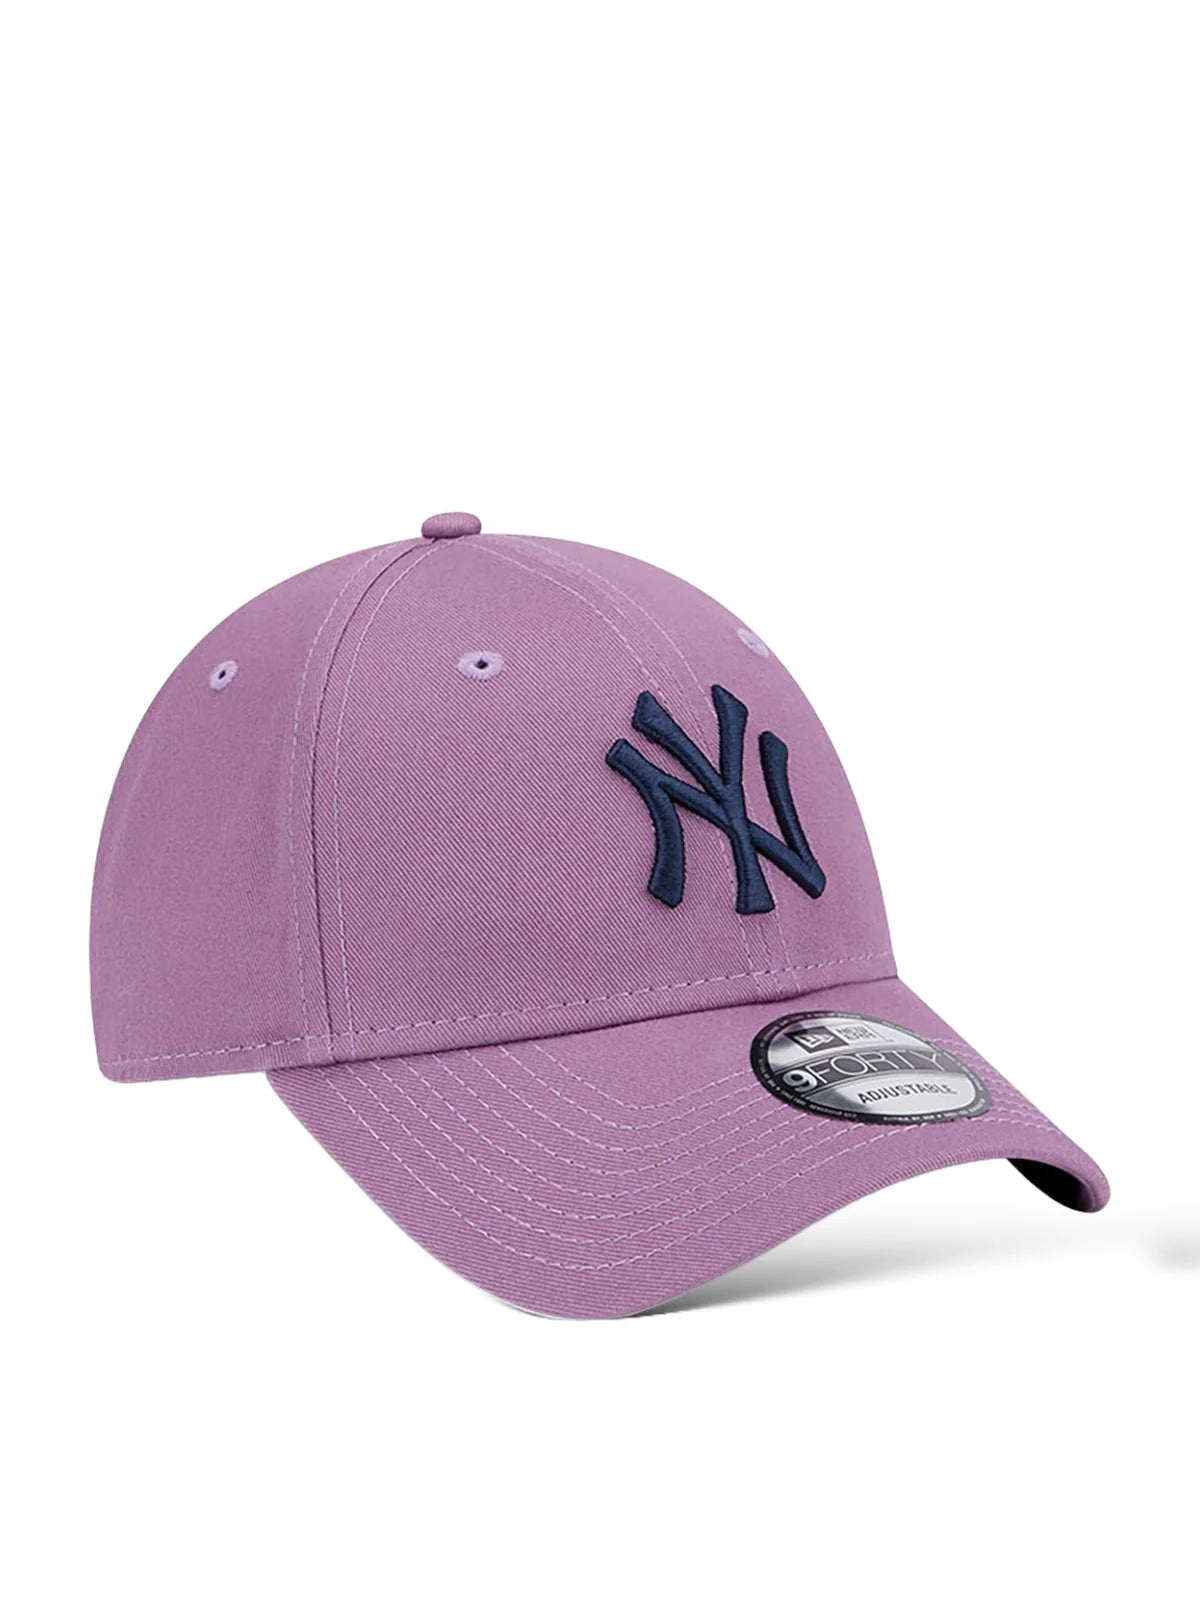 CAPPELLINO NY YANKEES ESSENTIAL LOGO 9FORTY